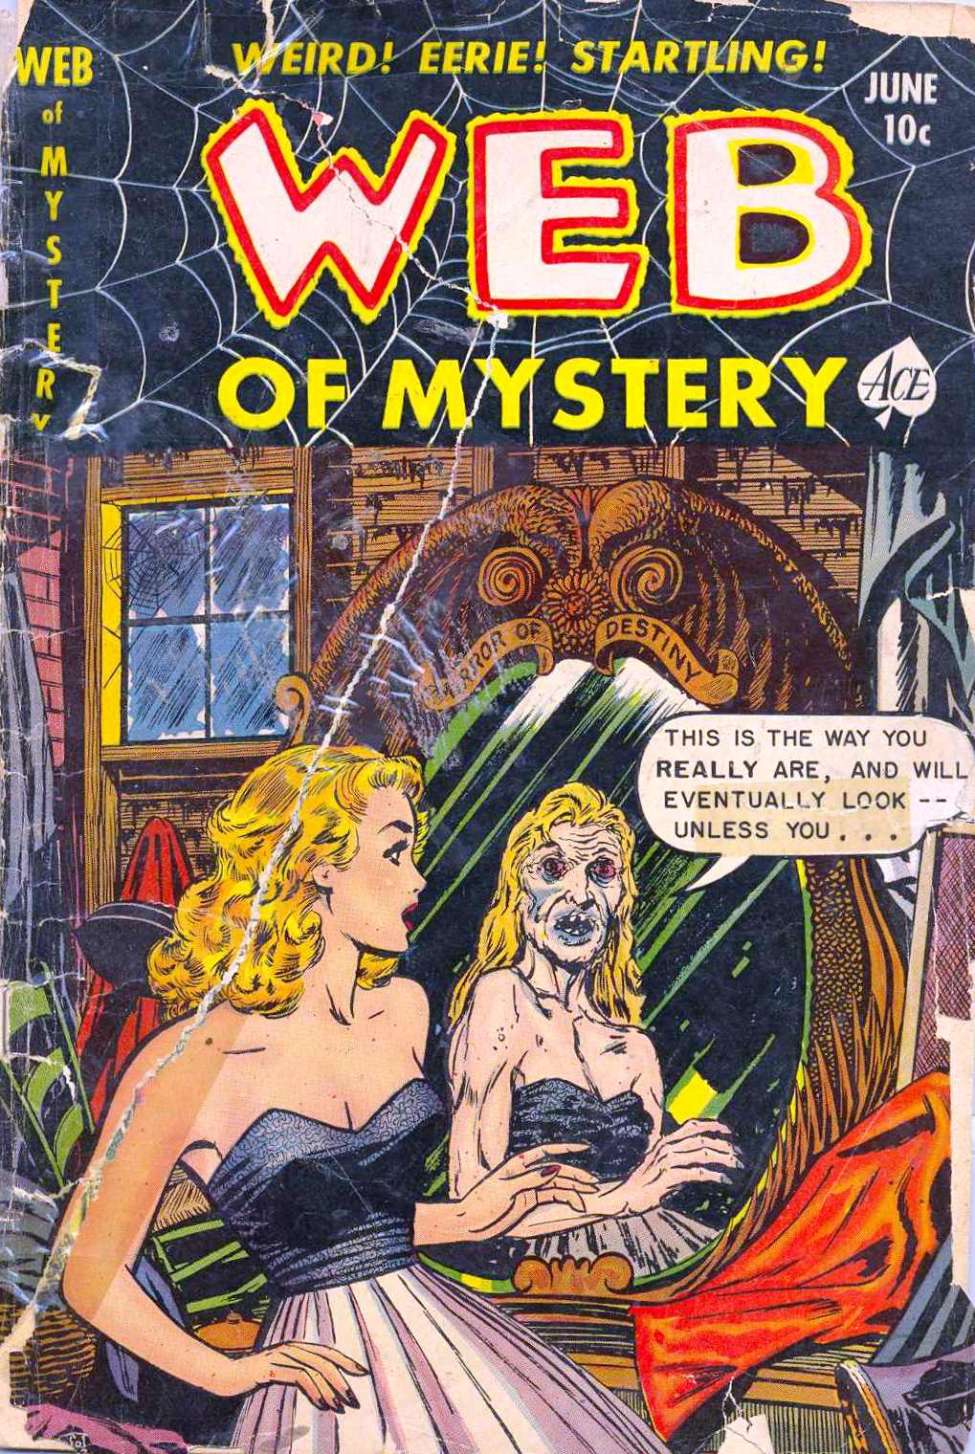 Comic Book Cover For Web of Mystery 10